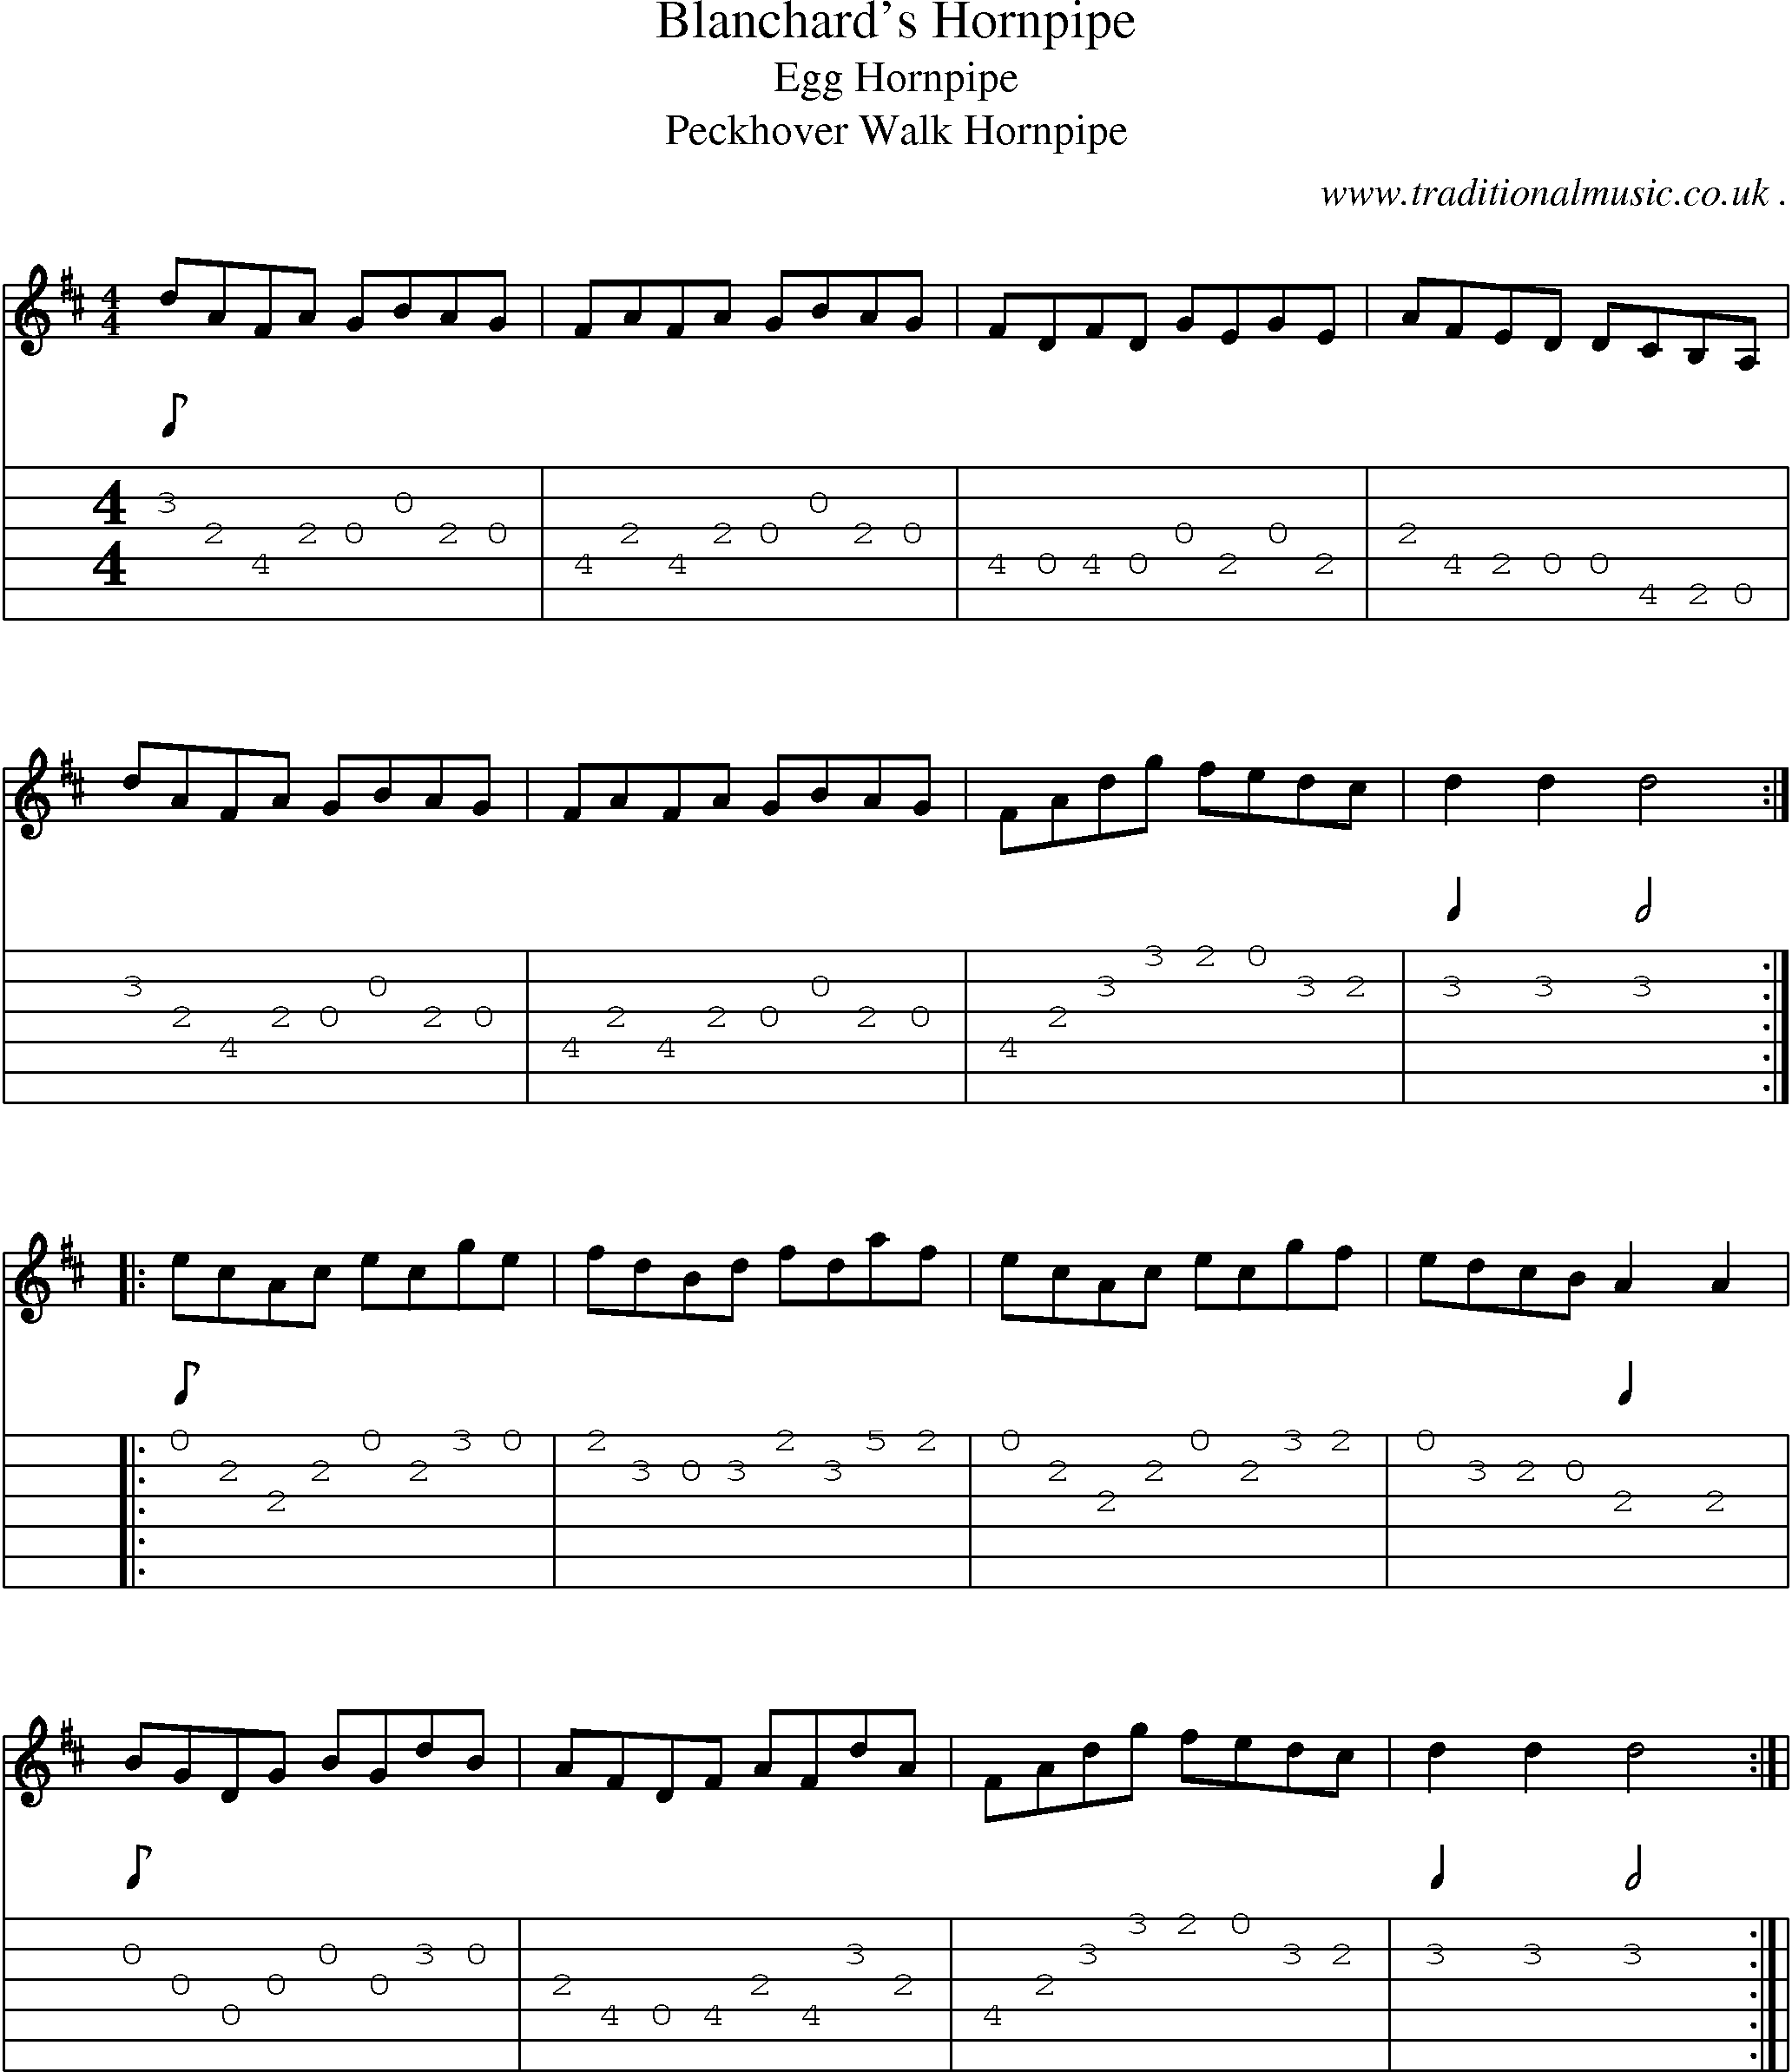 Sheet-Music and Guitar Tabs for Blanchards Hornpipe